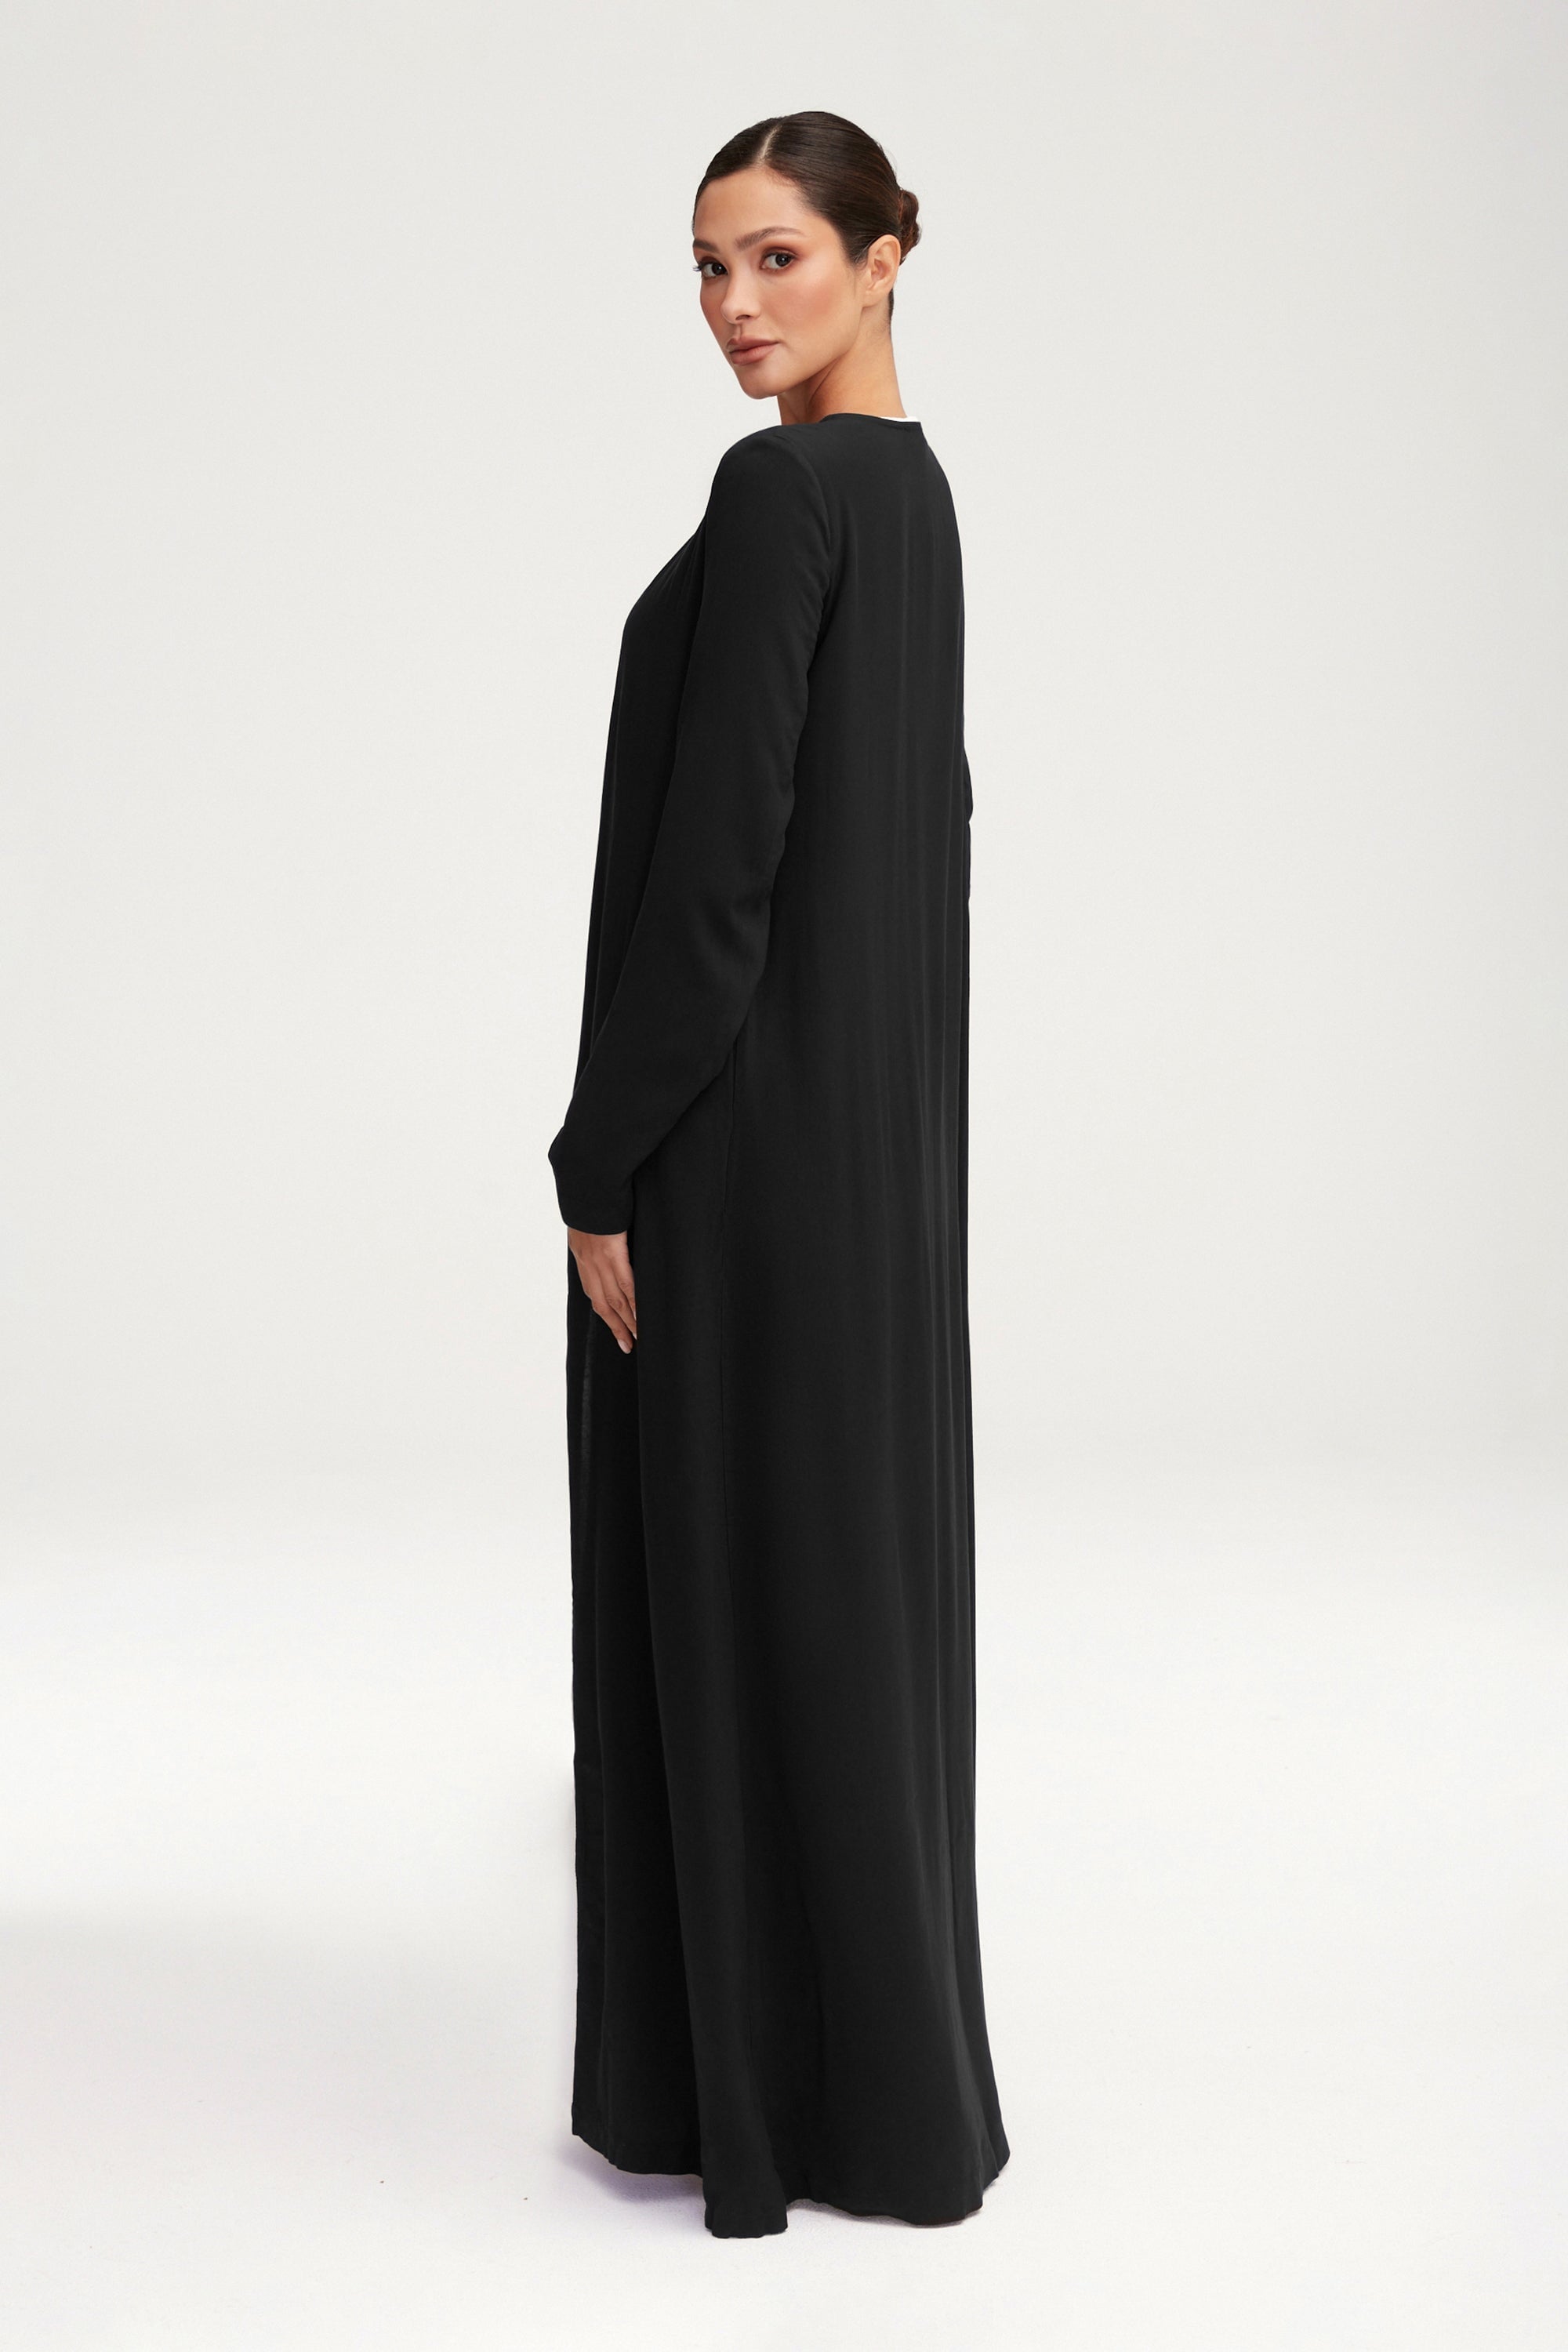 Essential Woven Open Abaya - Black Clothing Veiled 